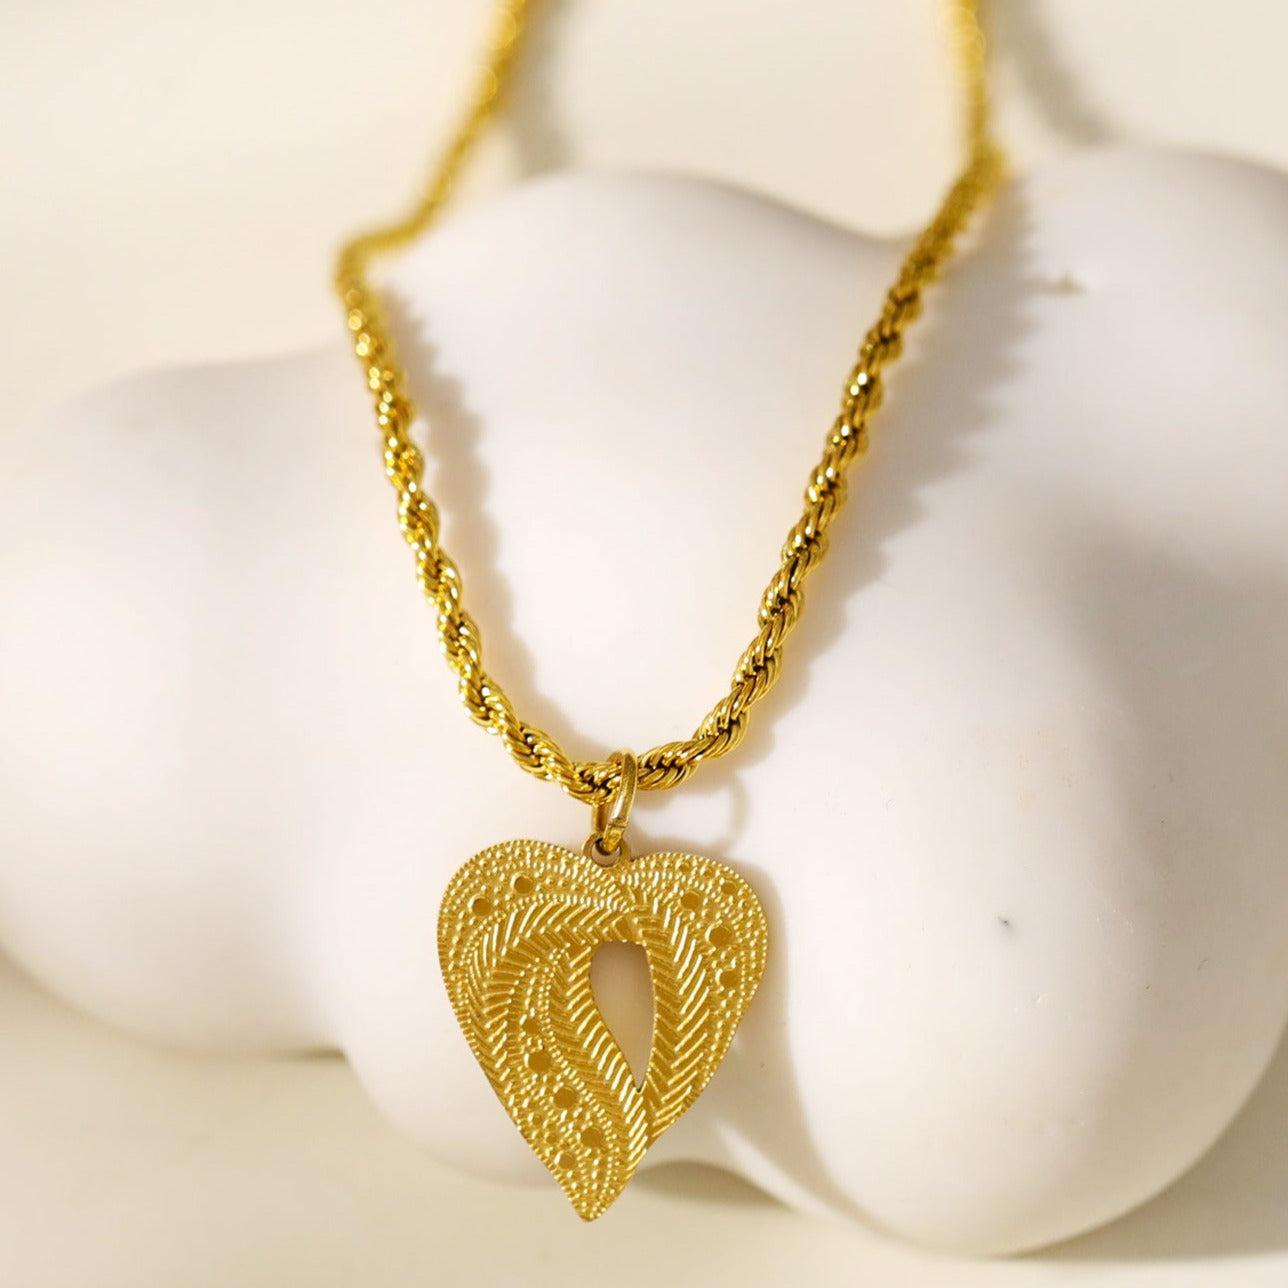 hackney-nine | hackney-nine-jewellery | Style GIVERNY 45242: Ornate Abstract Heart Pendant on a Rope Chain Necklace.